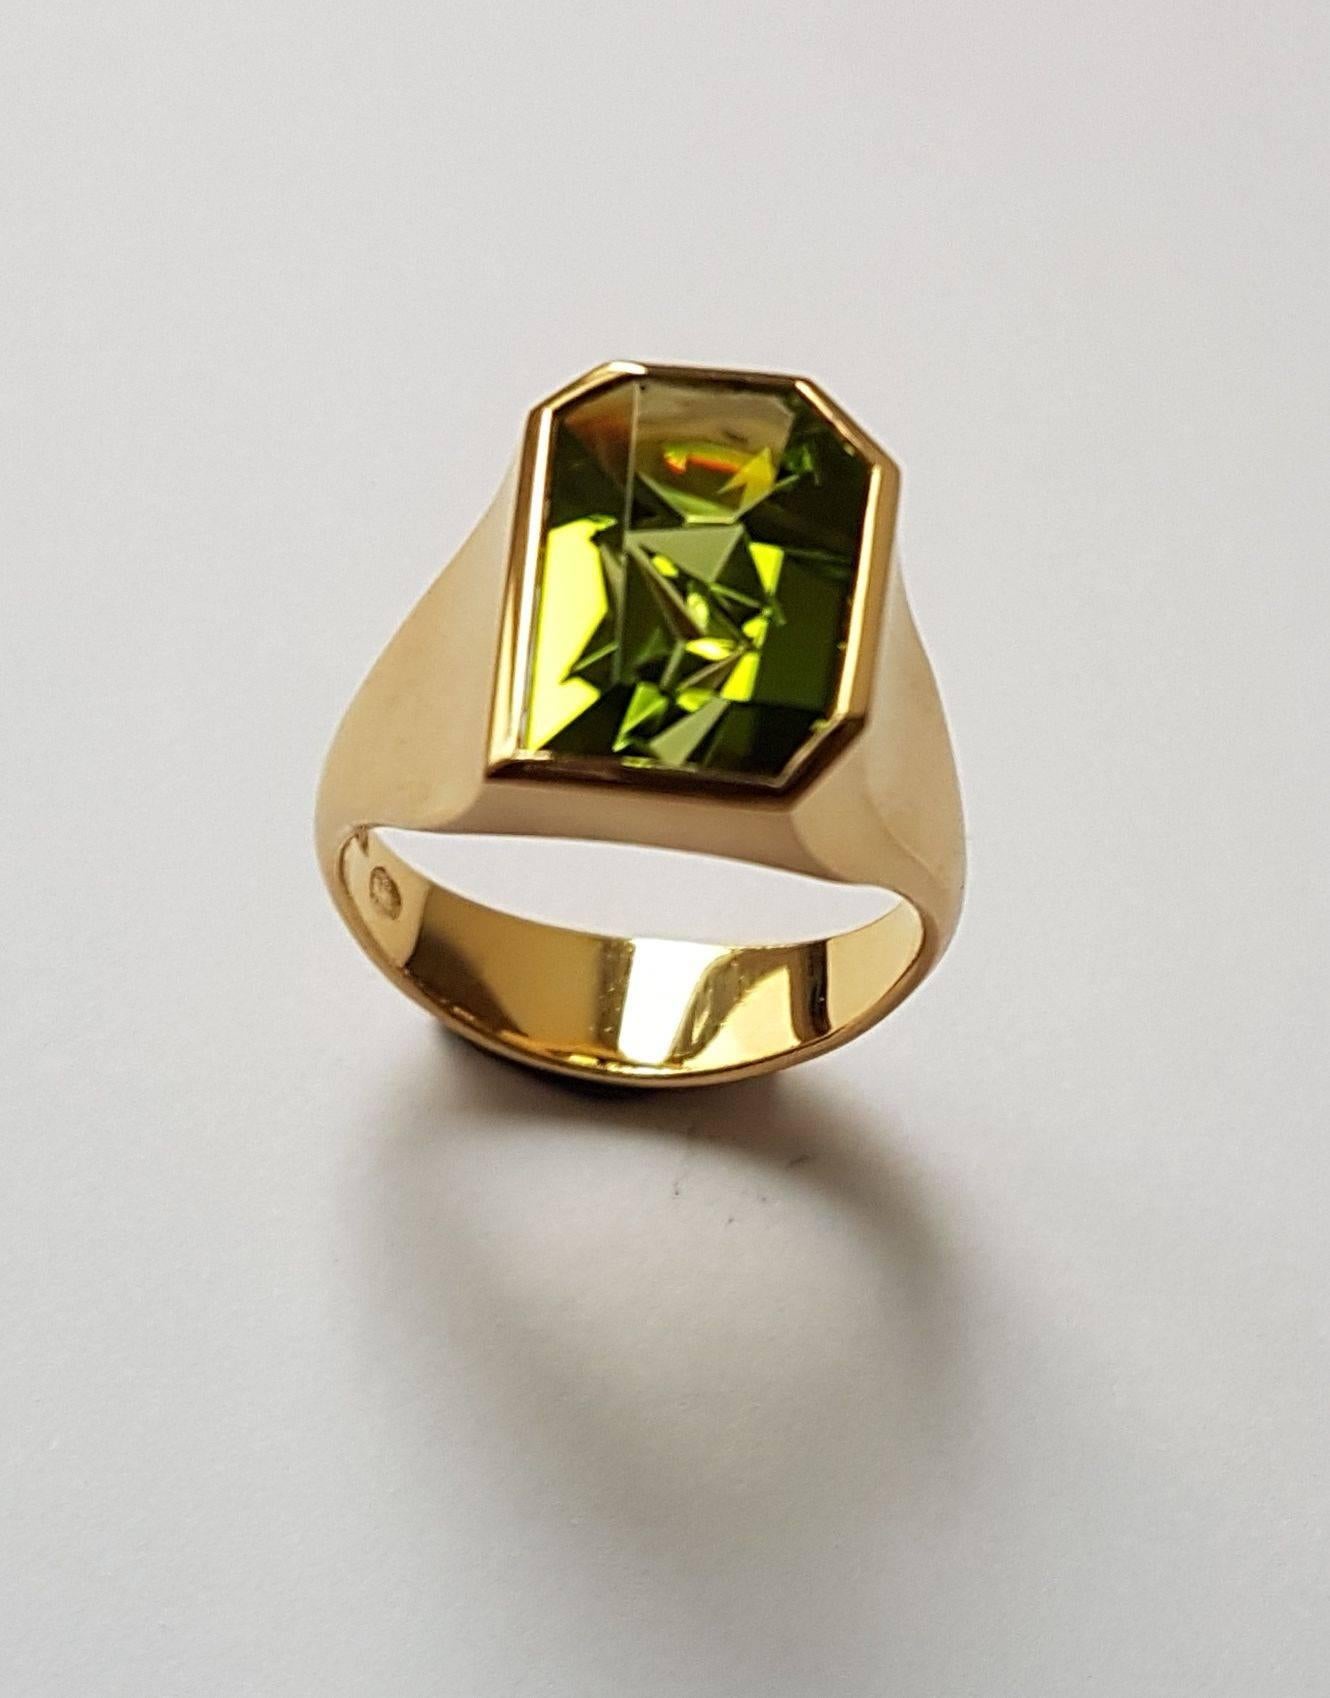 Gorgeous ring made of 750/0 yellow gold with a fancy cut peridot, 4.77 carats, by Atelier Munsteiner.
A lovely piece of fine craftsmanship.
Ring size 55 (European Size)
